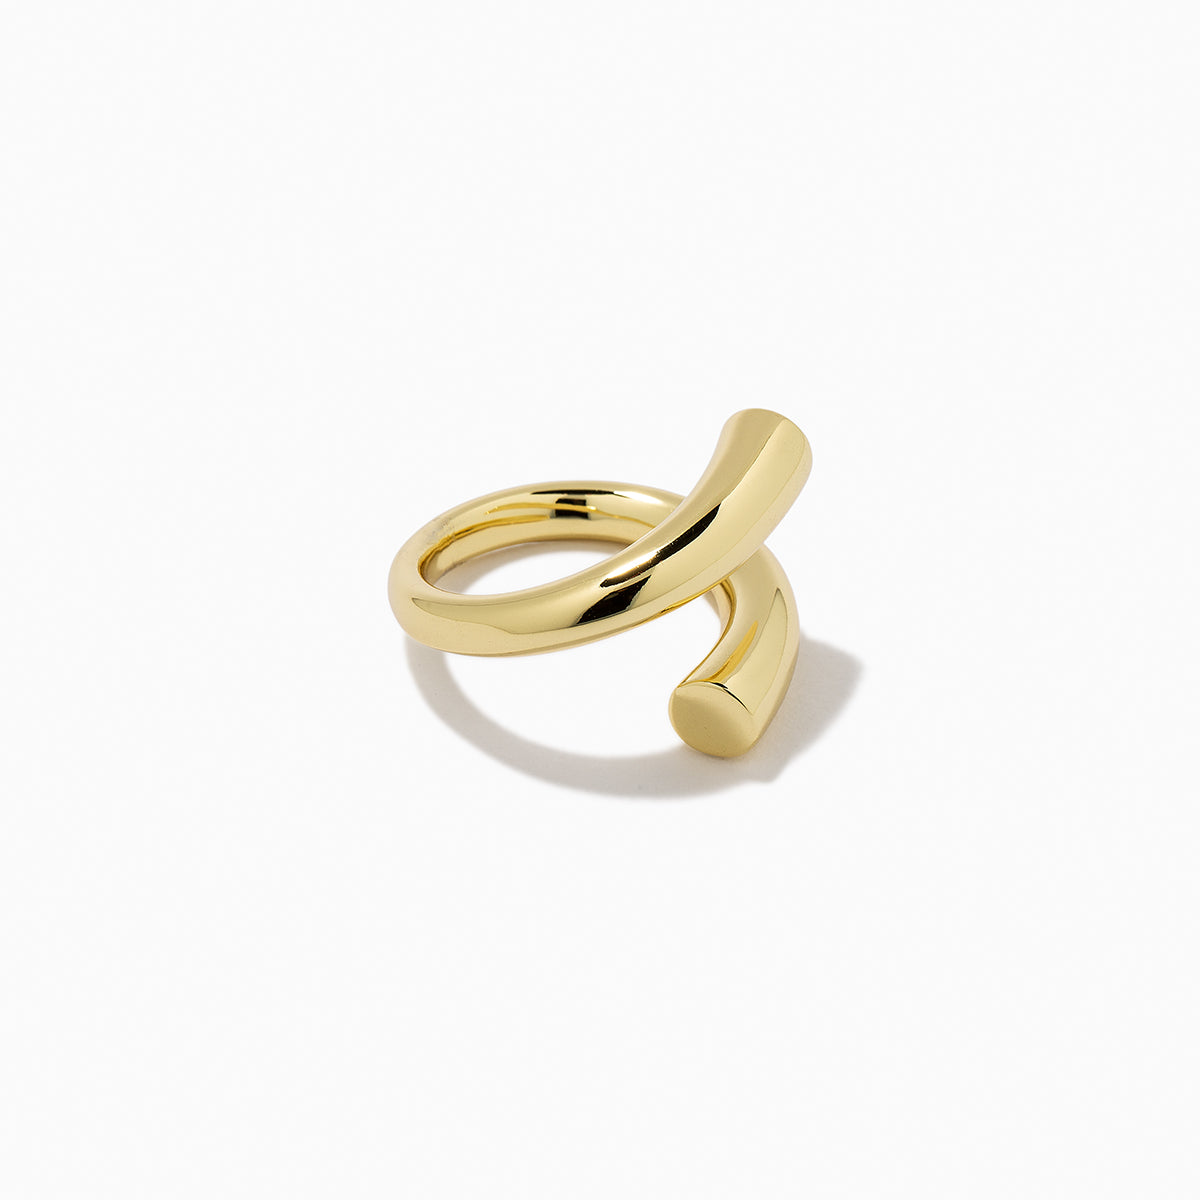 Around Town Ring | Gold | Product Detail Image | Uncommon James